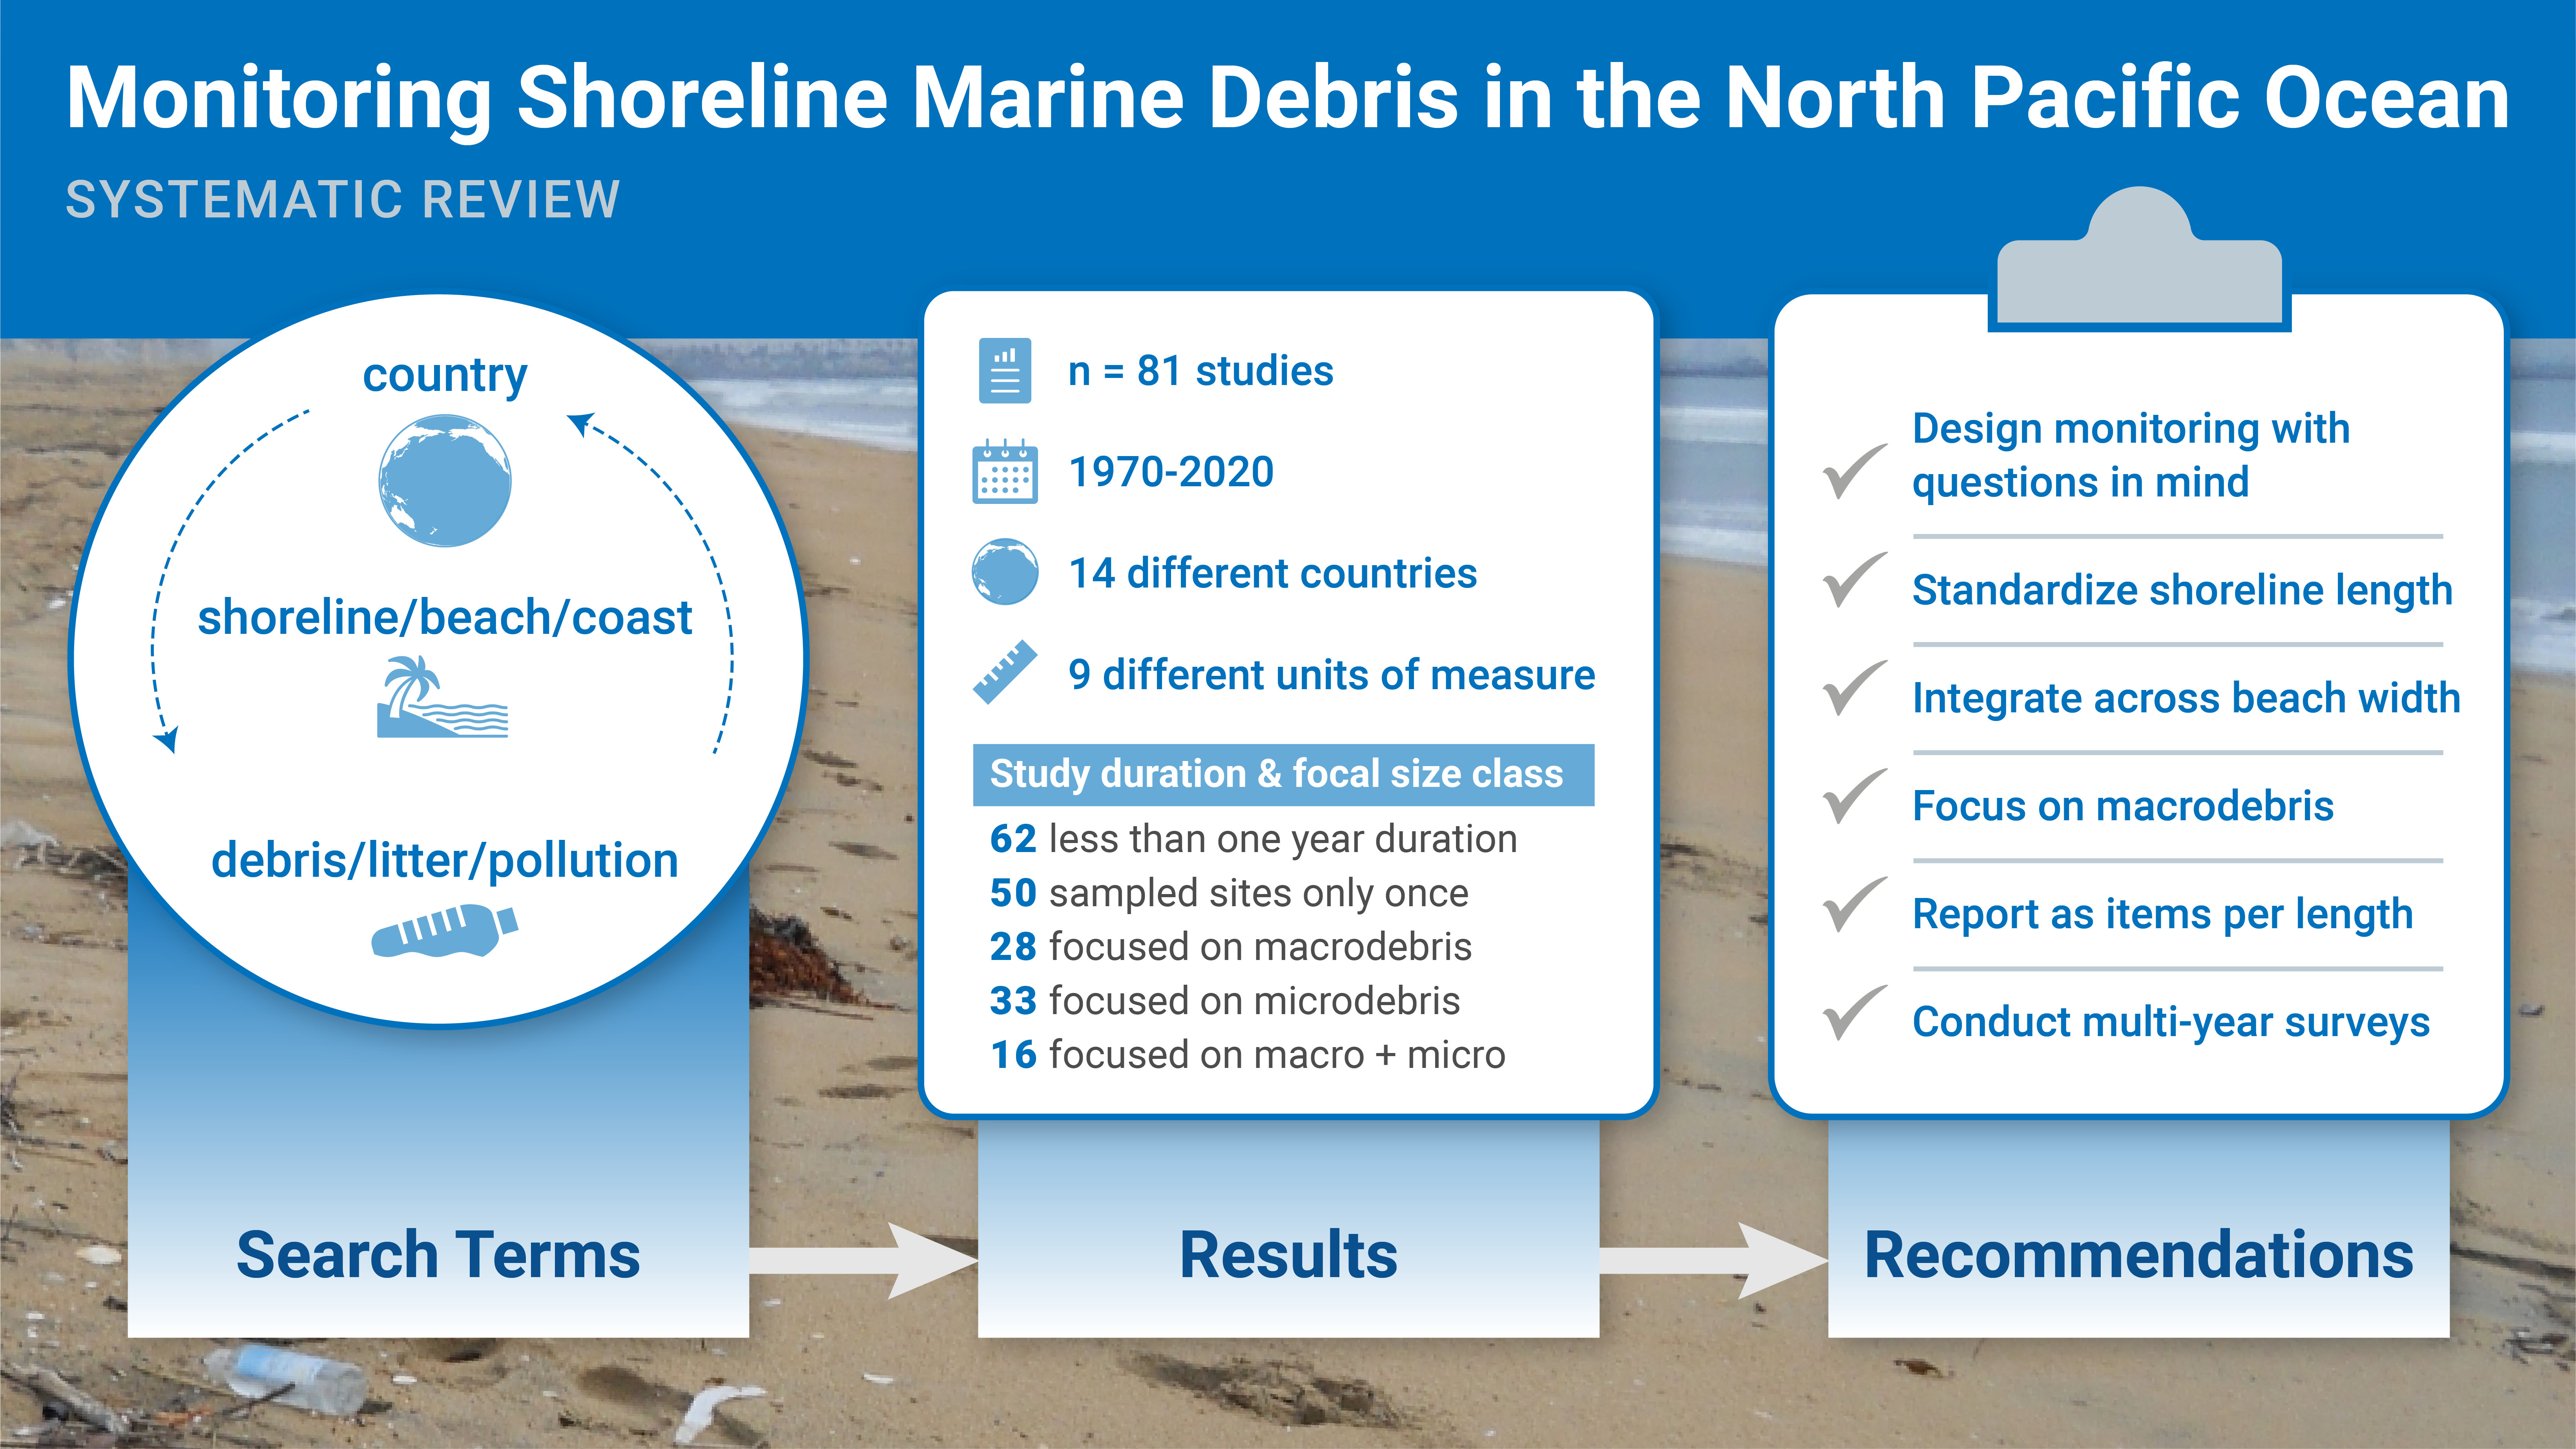 A graphic for "New Publication Reviews Shoreline Debris Data in the North Pacific Ocean" depicting search terms, results, and recommendations.